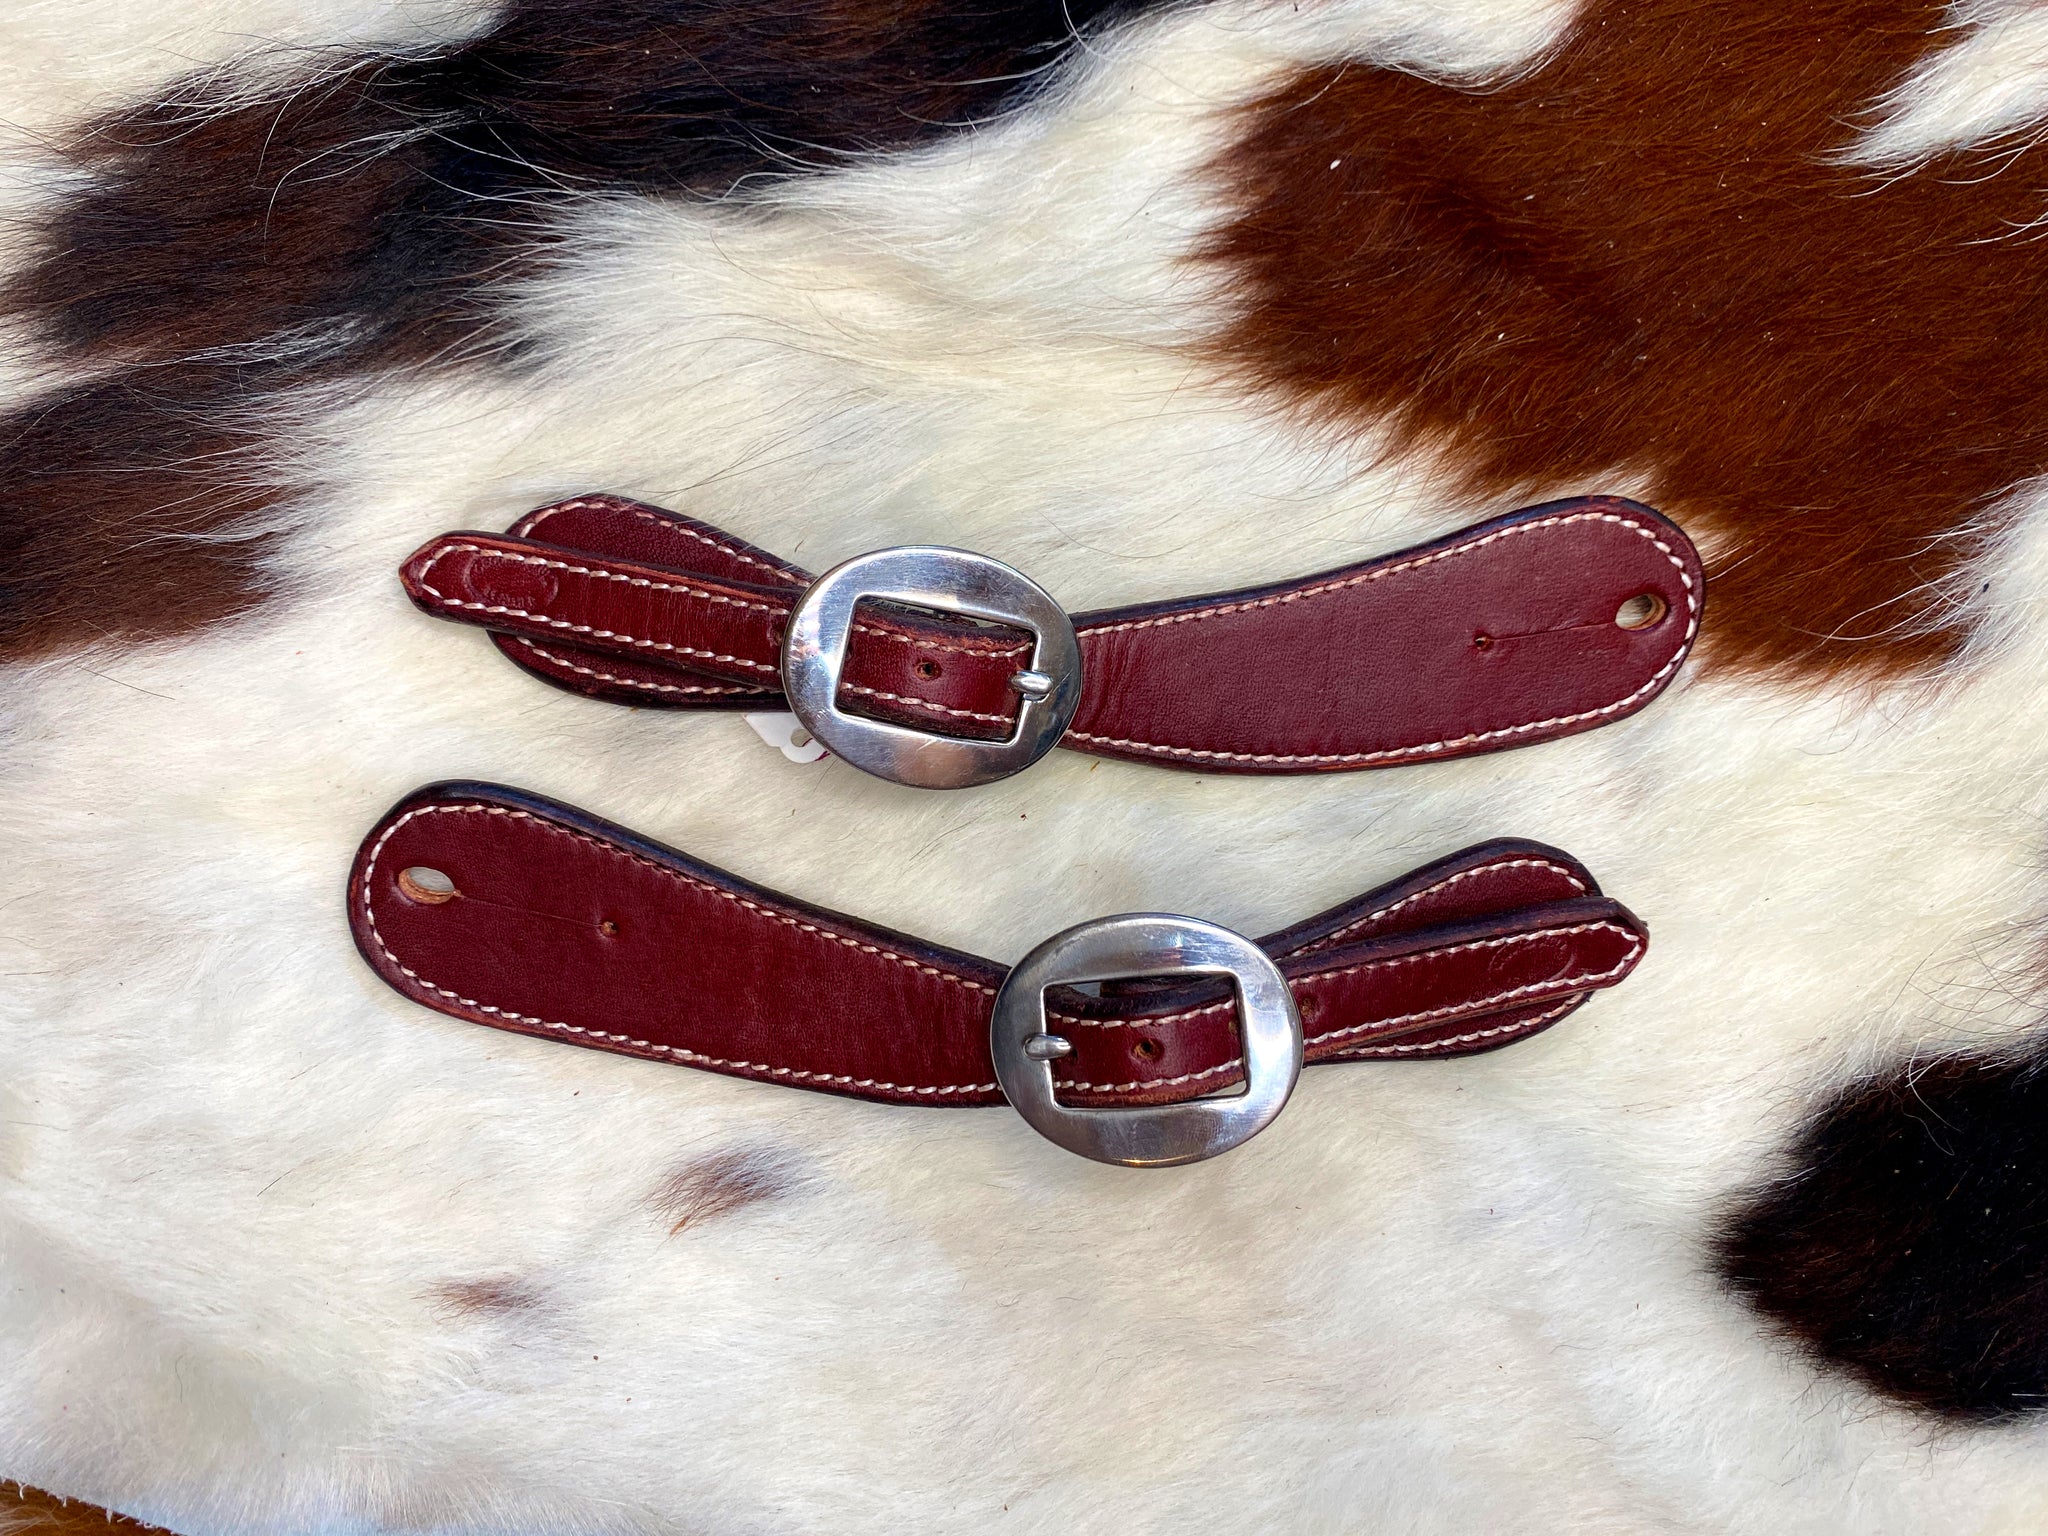 English Bridle Spur Leathers